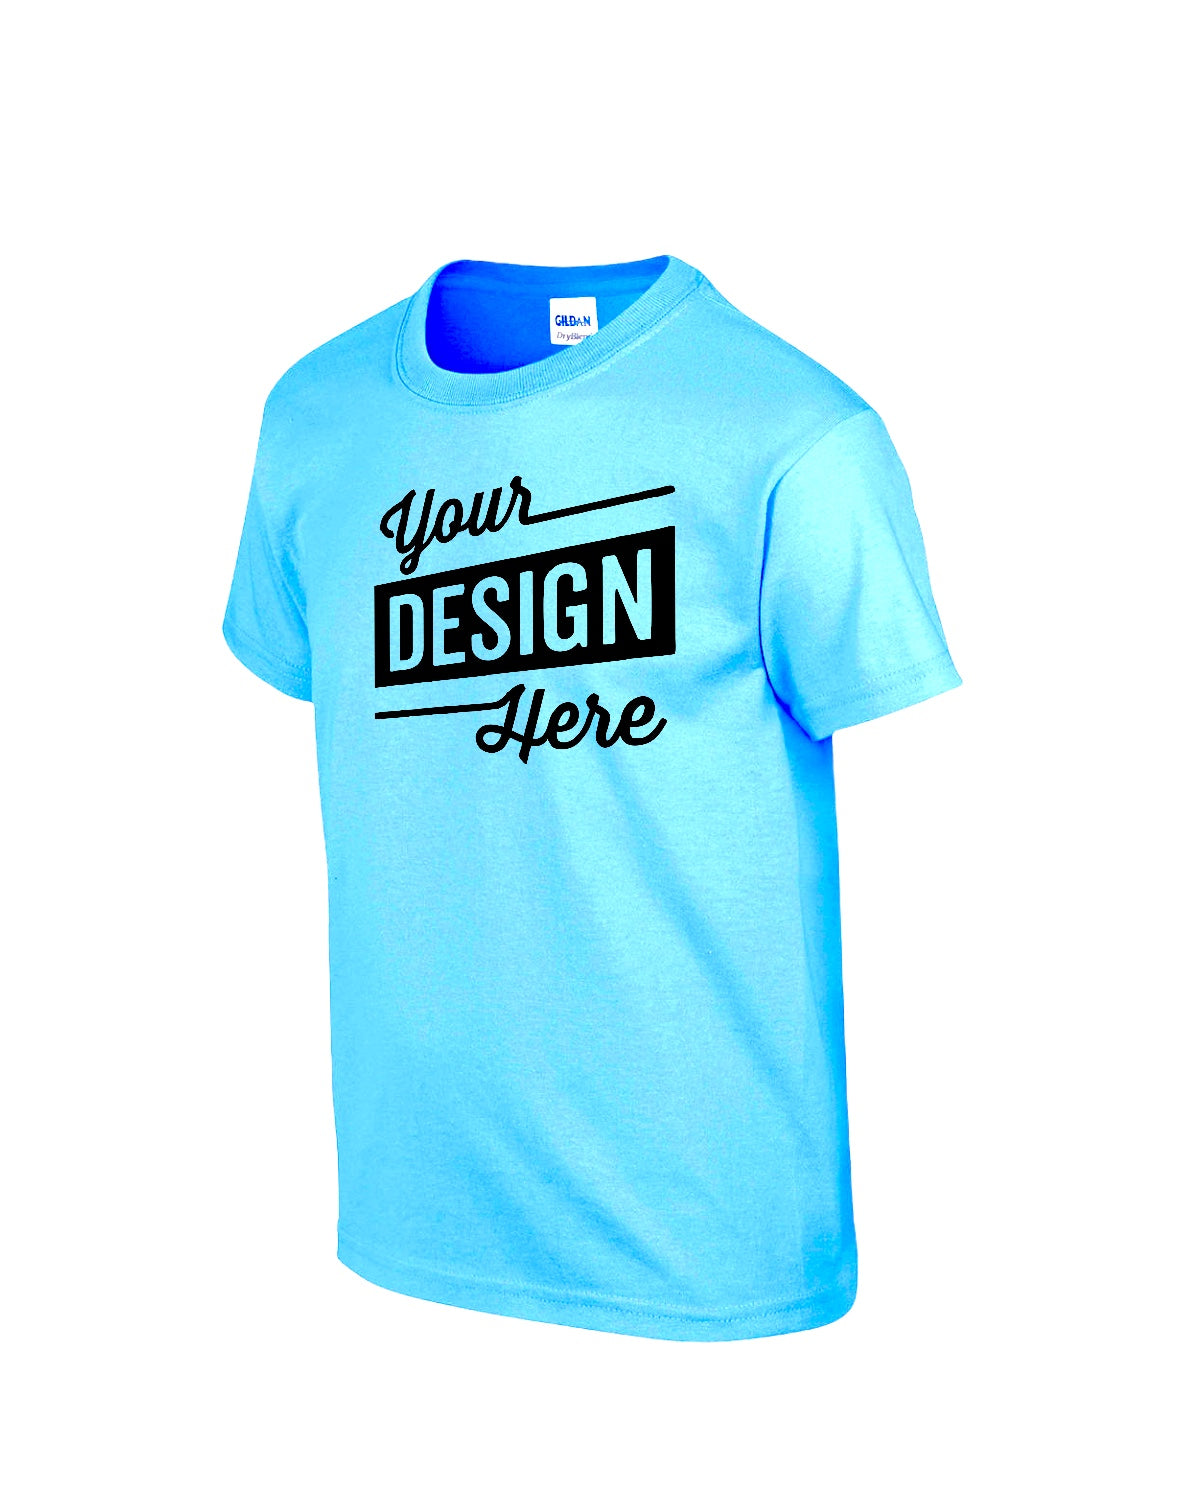 Bulk Prices, Customize Your Own Shirt With Text, WHOLESALE